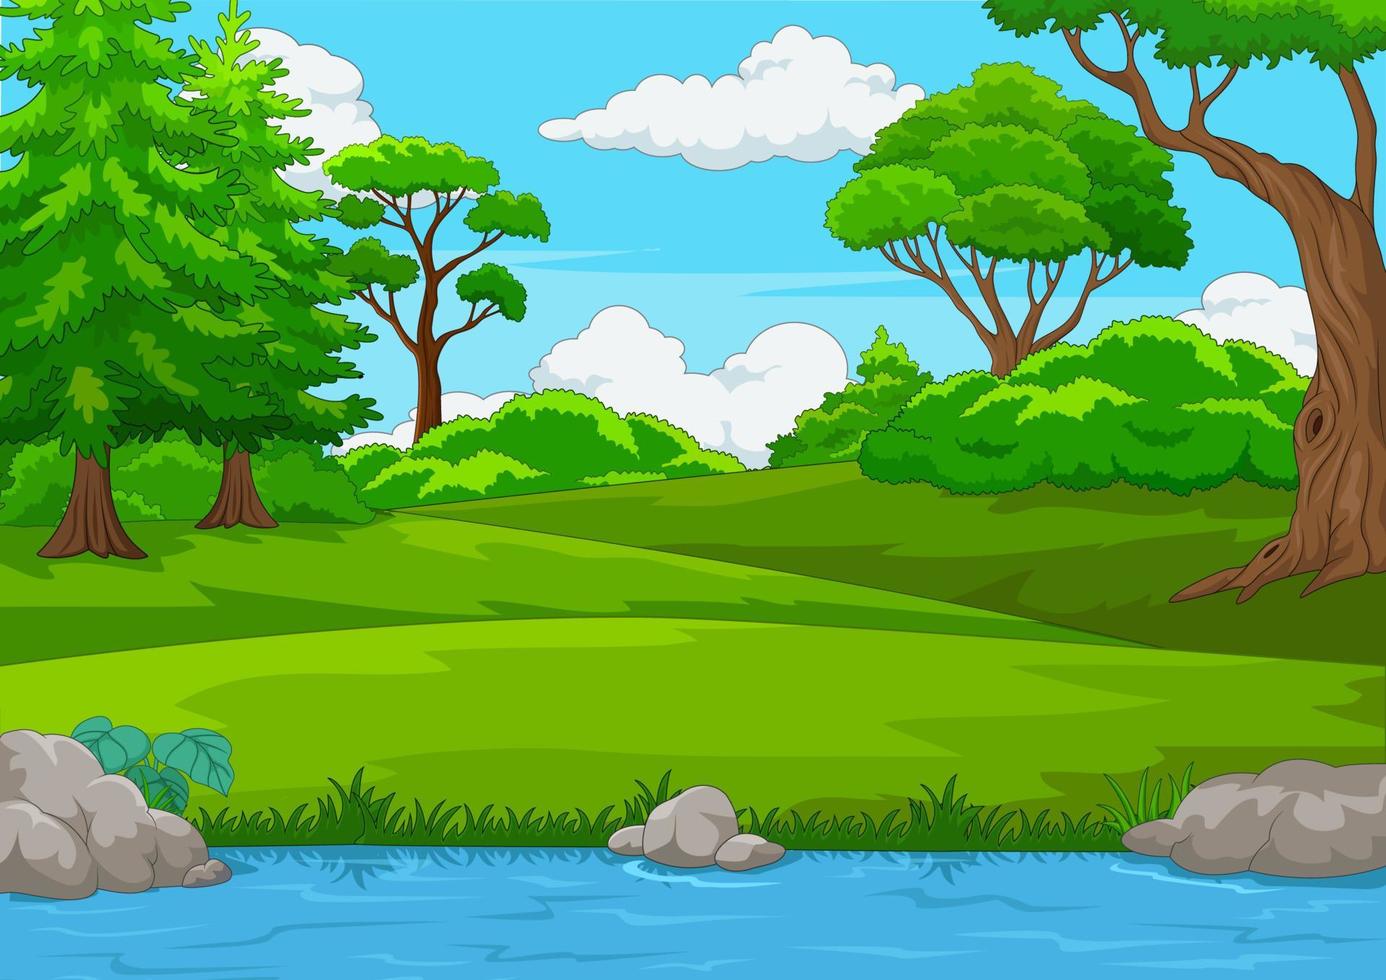 Forest scene with many trees and river illustration vector